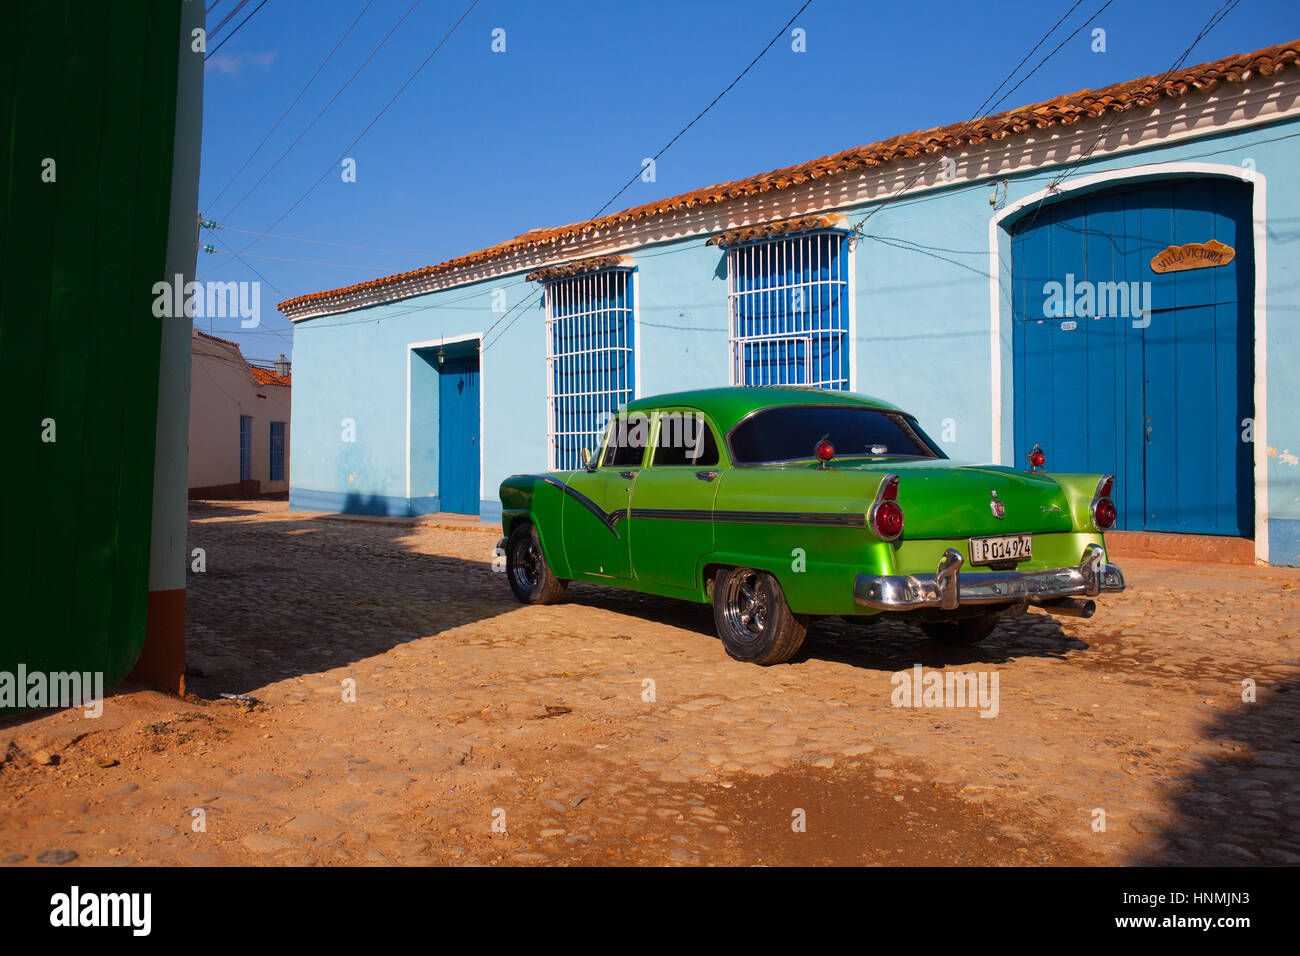 The typical american green classic car parked in the old colonial town of Trinidad, Cuba. (UNESCO World Heritage) Stock Photo